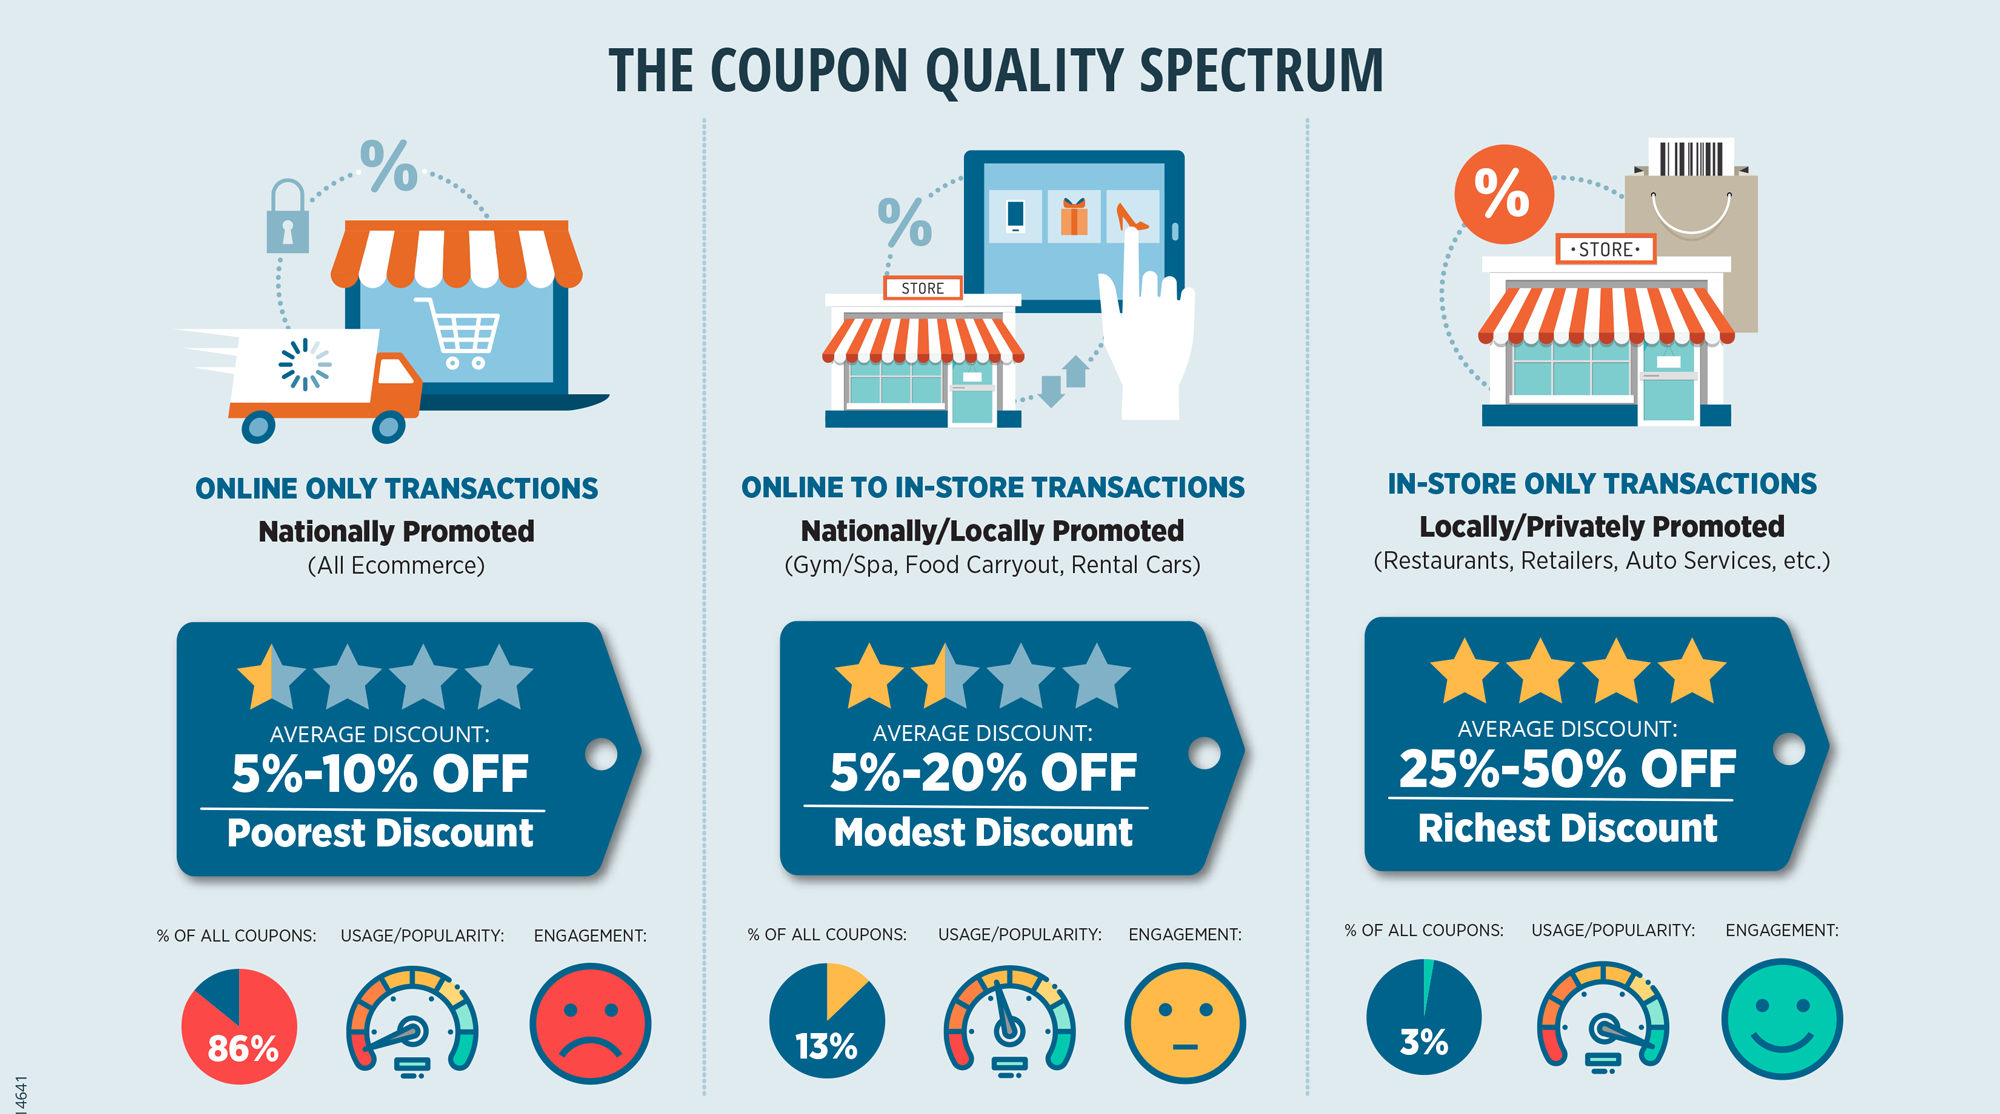 What Kind of Coupons and Discounts are Best?